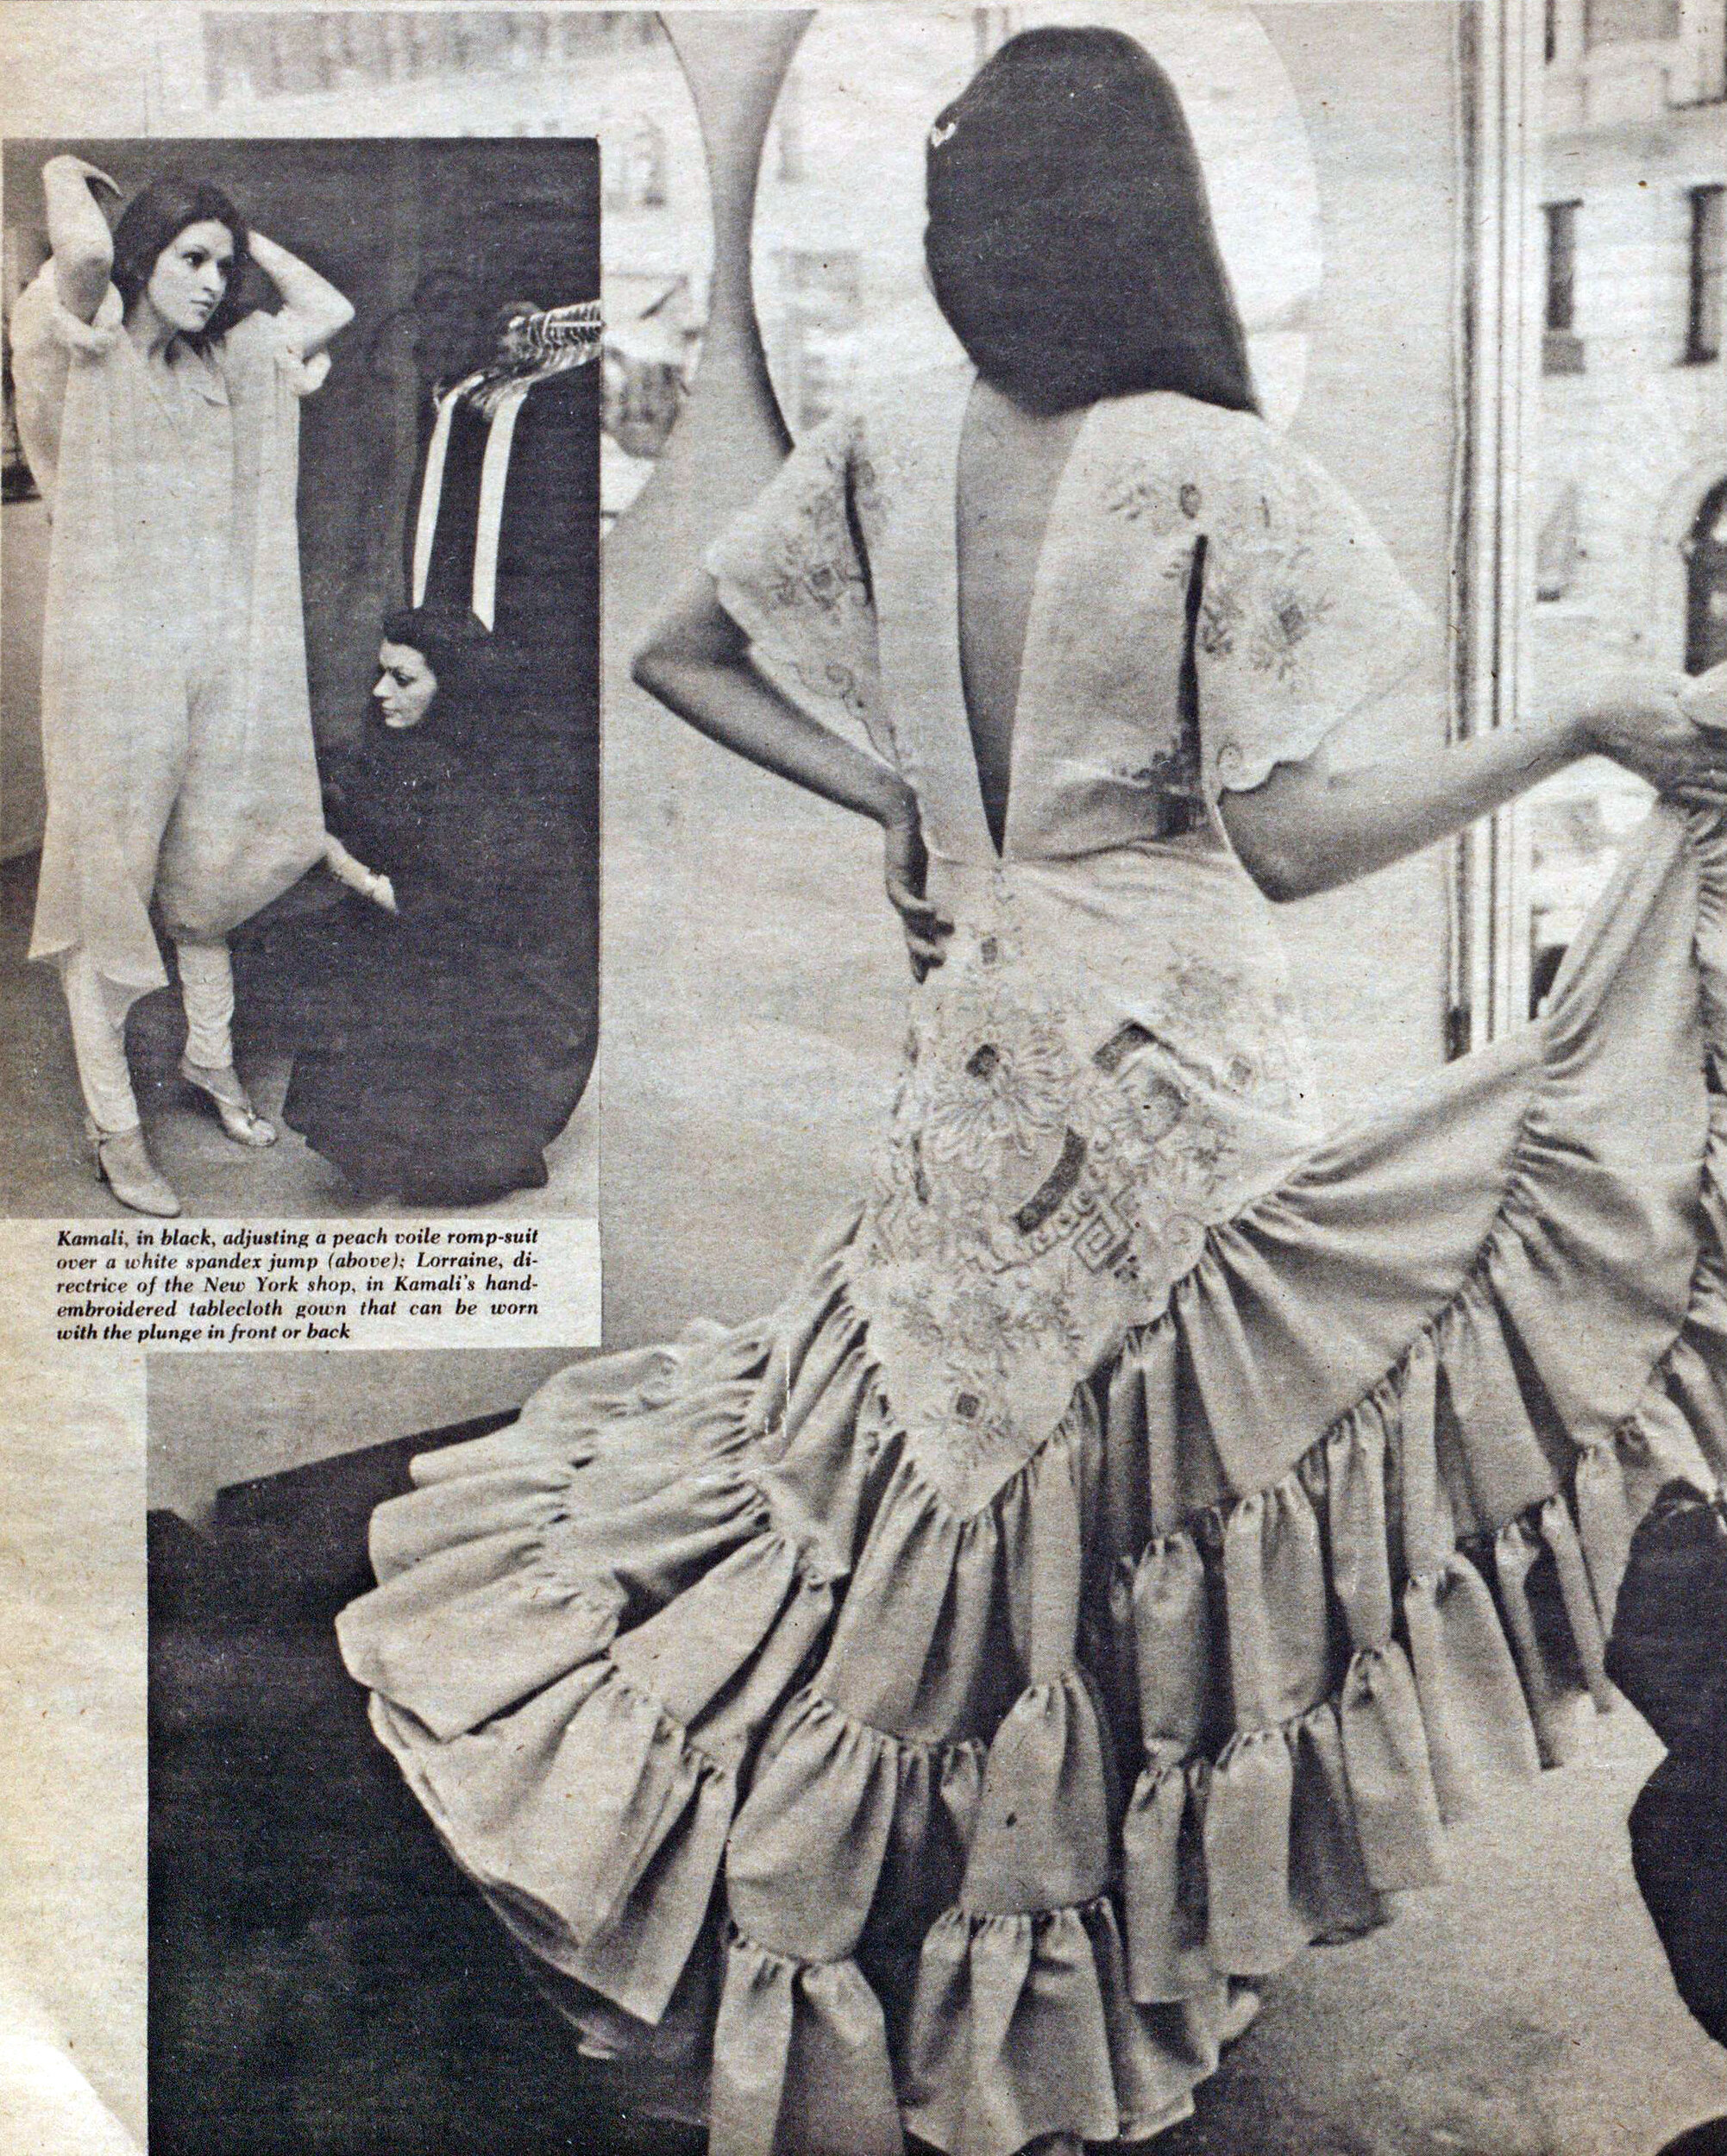 A dress made from a hand-embroidered tablecloth. WWD, April 15, 1977.